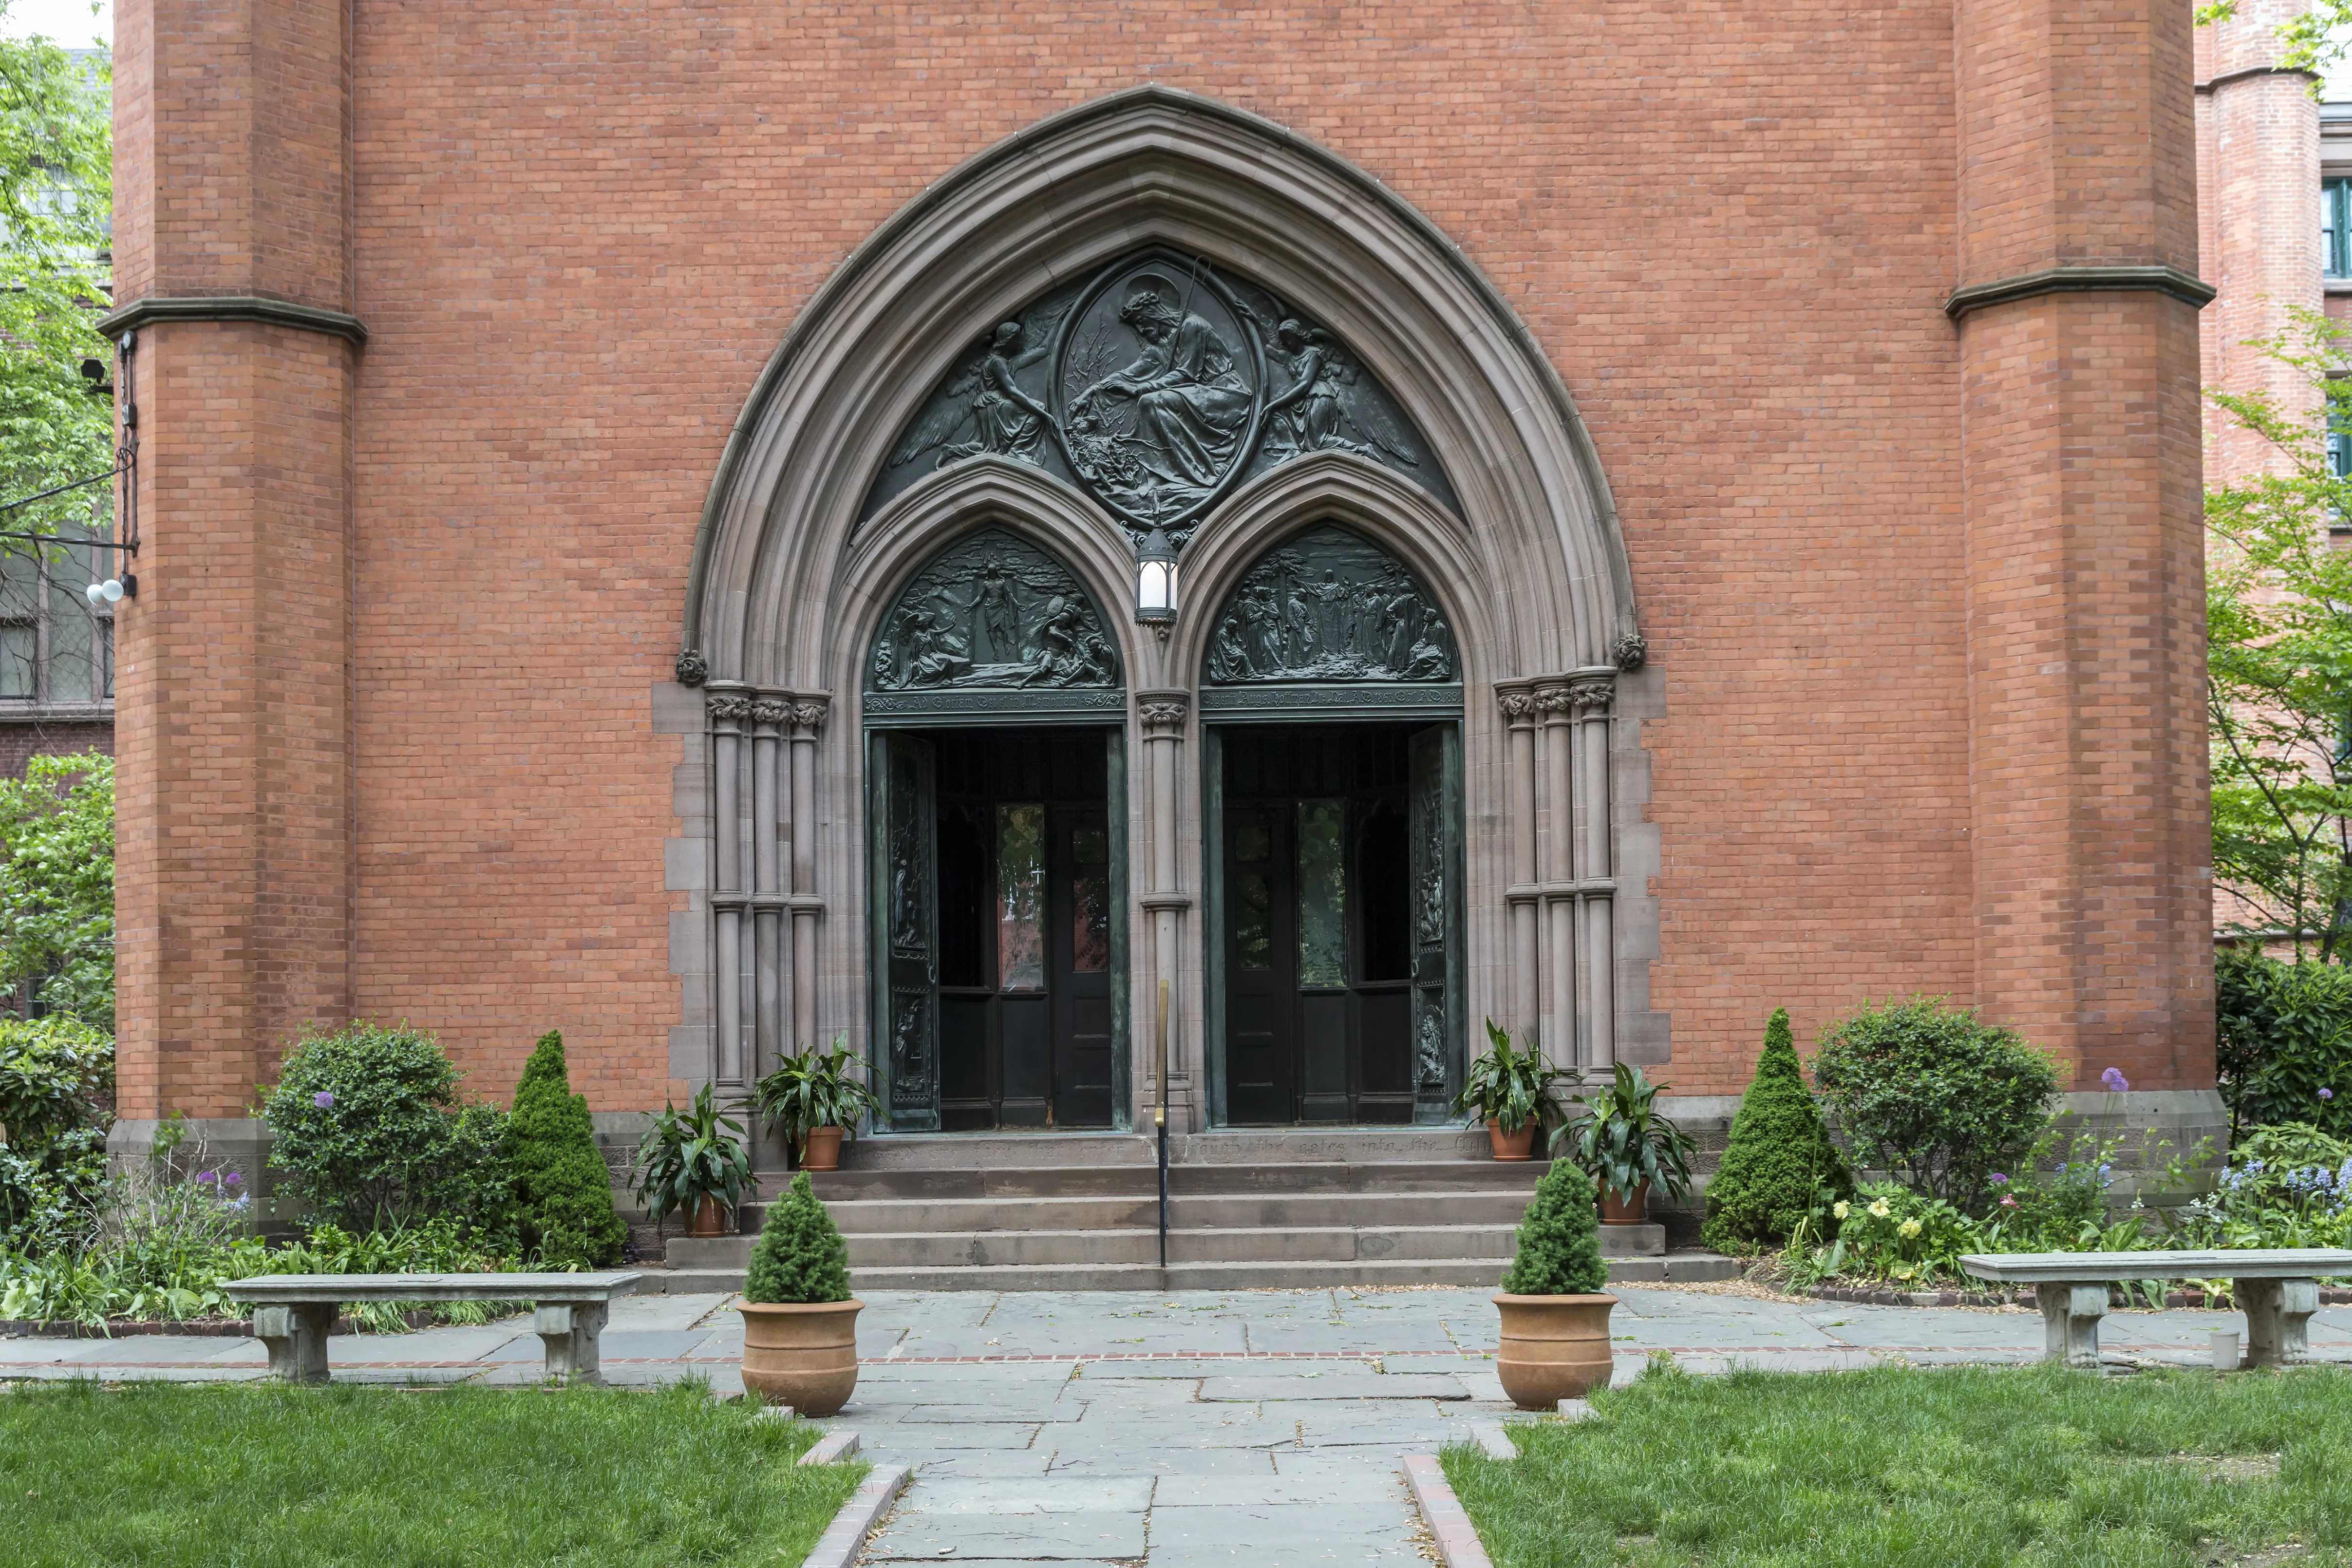 The Chapel of the Good Shepherd is home to the General Theological Seminary in the Chelsea neighborhood of New York City.?w=200&h=150